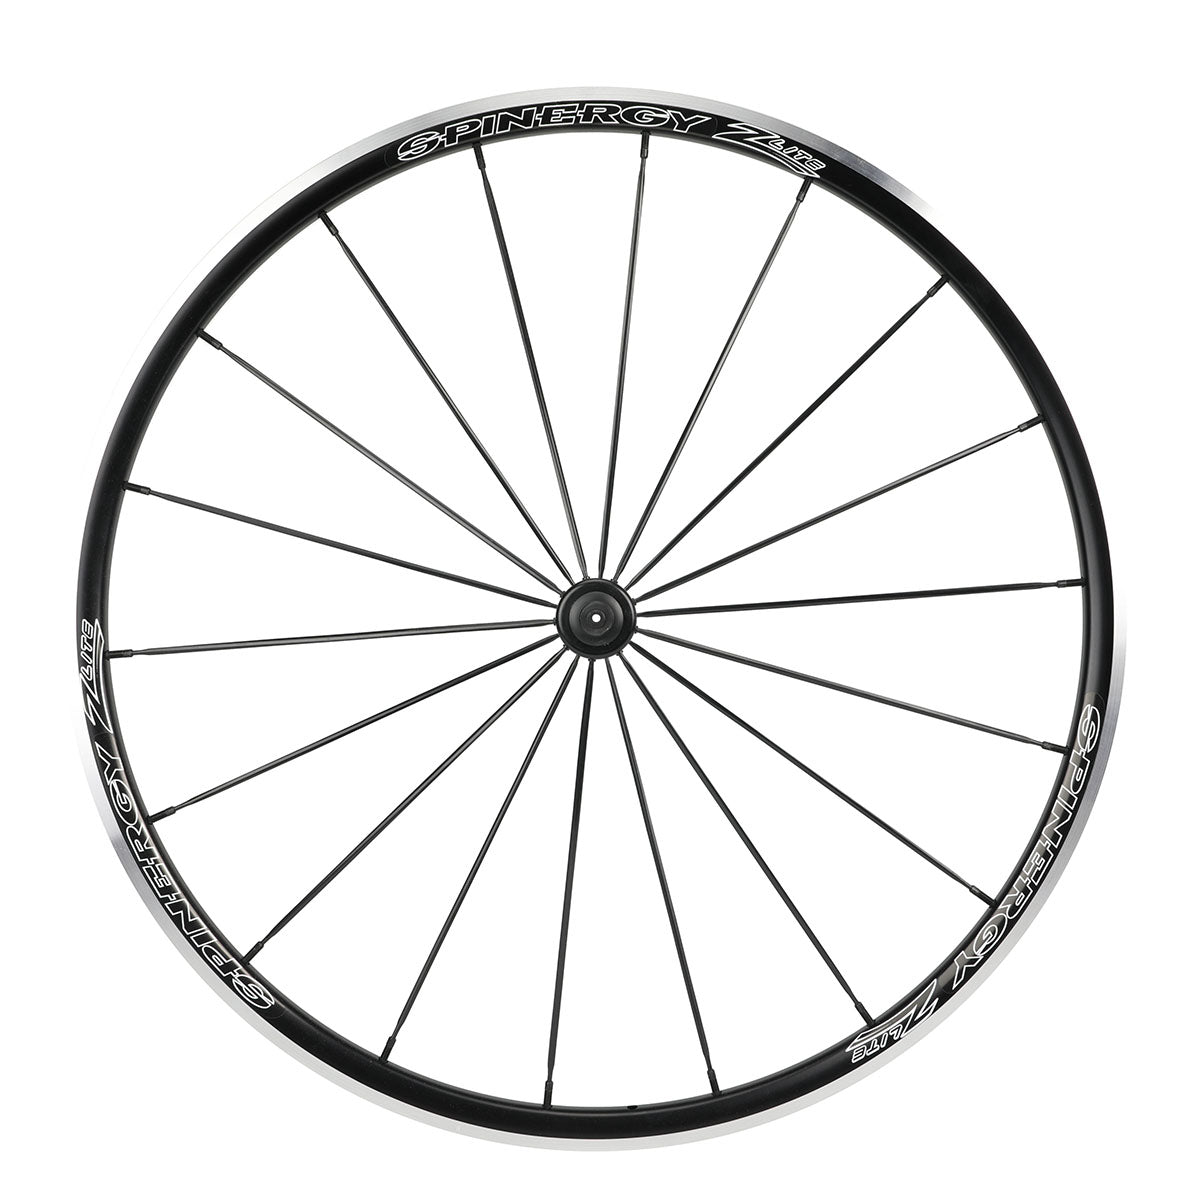 SPINERGY - Z Lite 700c, Front Bicycle Wheel - Everyday, Road, Training - 2021 Model w/ "44" Hub